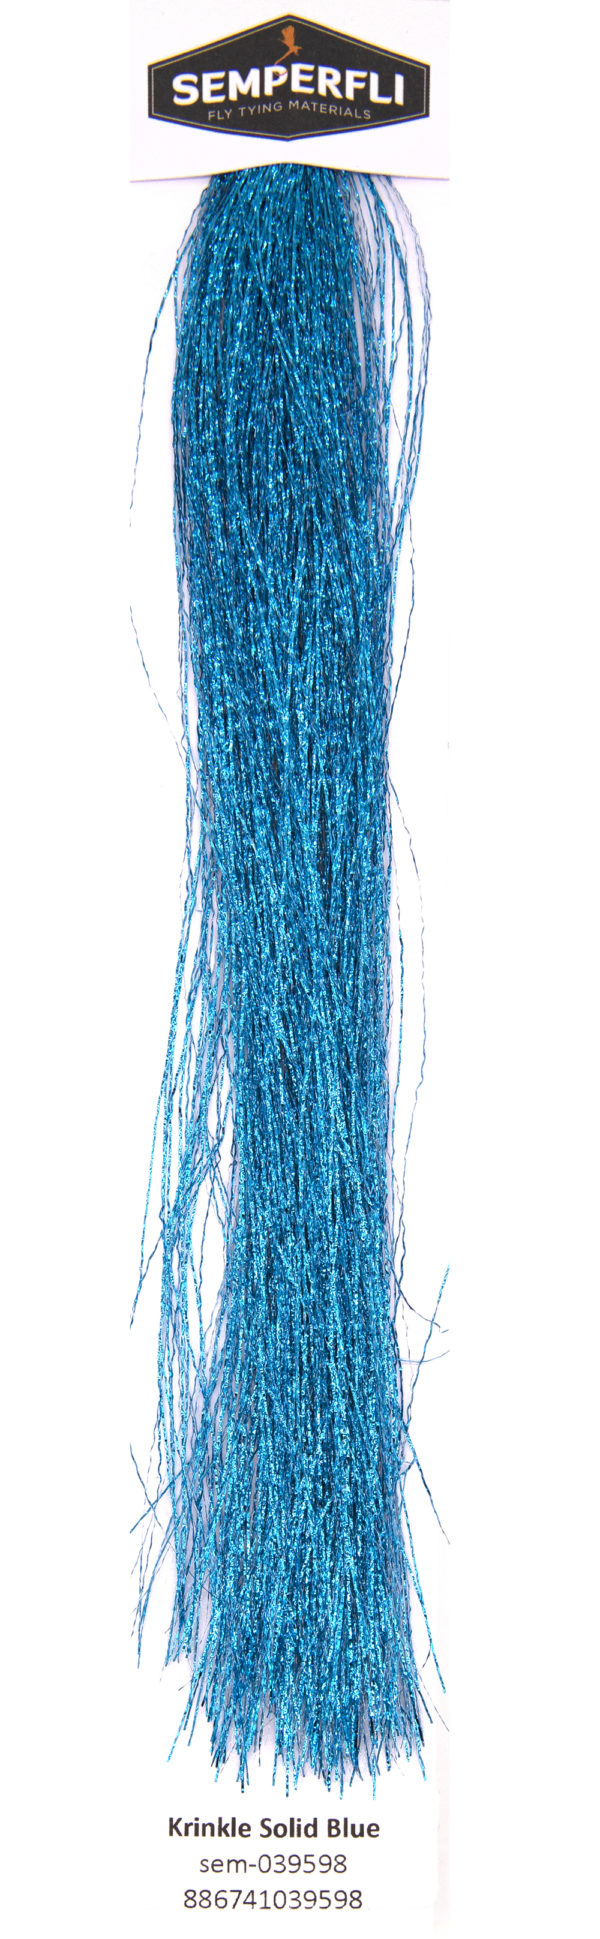 Perfect accent on a Dark Colored Baitfish is Blue Krinkle Flash